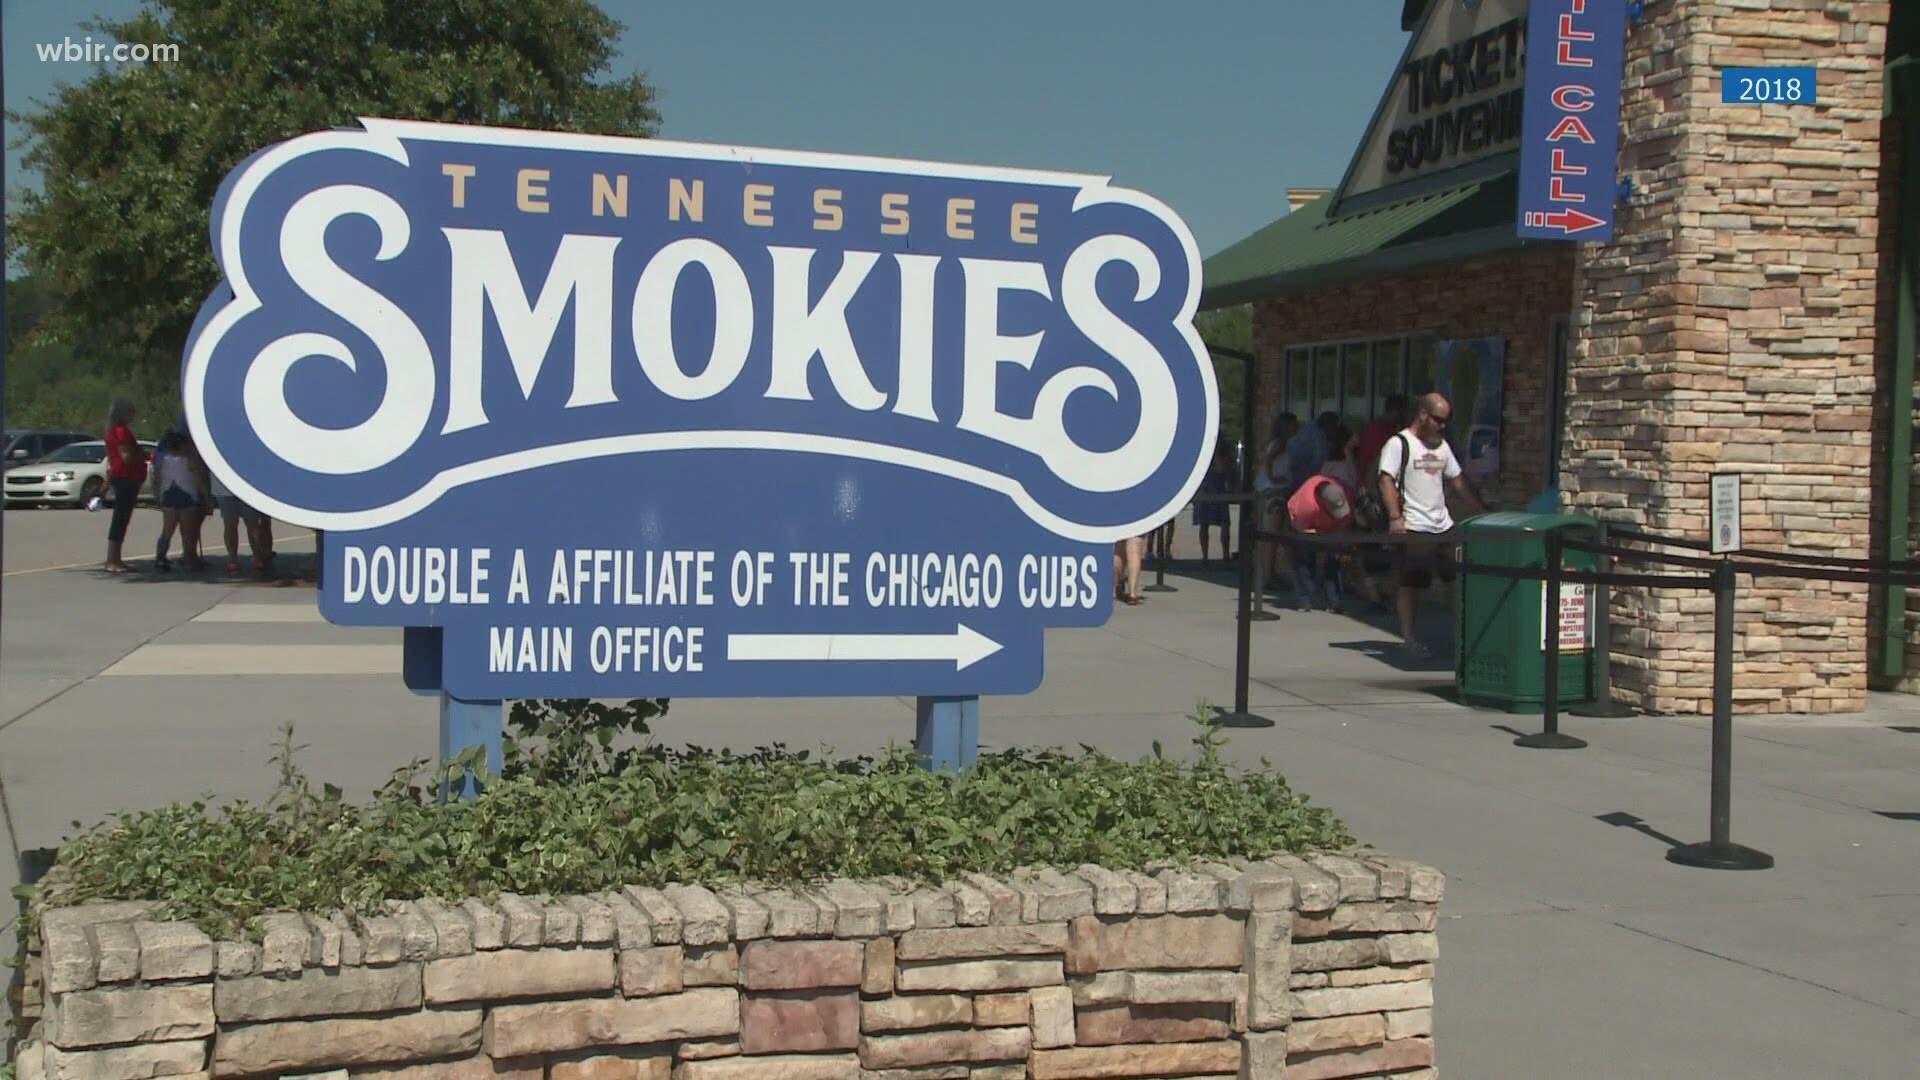 The Tennessee Smokies return to the diamond tonight after being shut down all of last year.